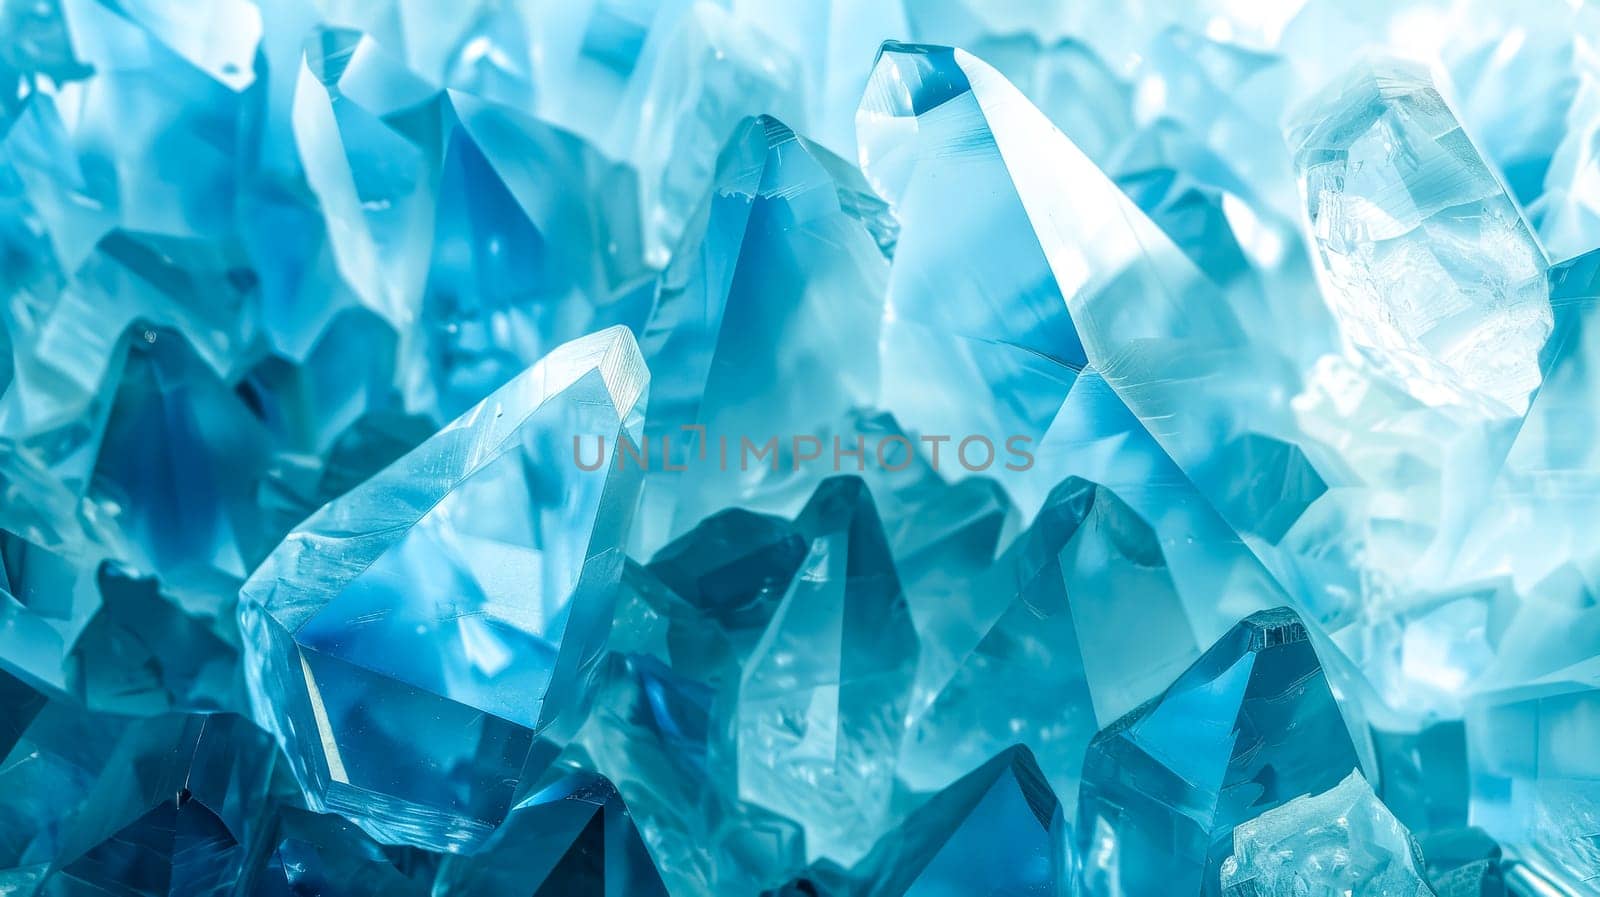 Close-up shot of abstract crystal ice background with vivid blue tones and geometric structure. Showcasing the sharp. Transparent. And elegant mineral texture